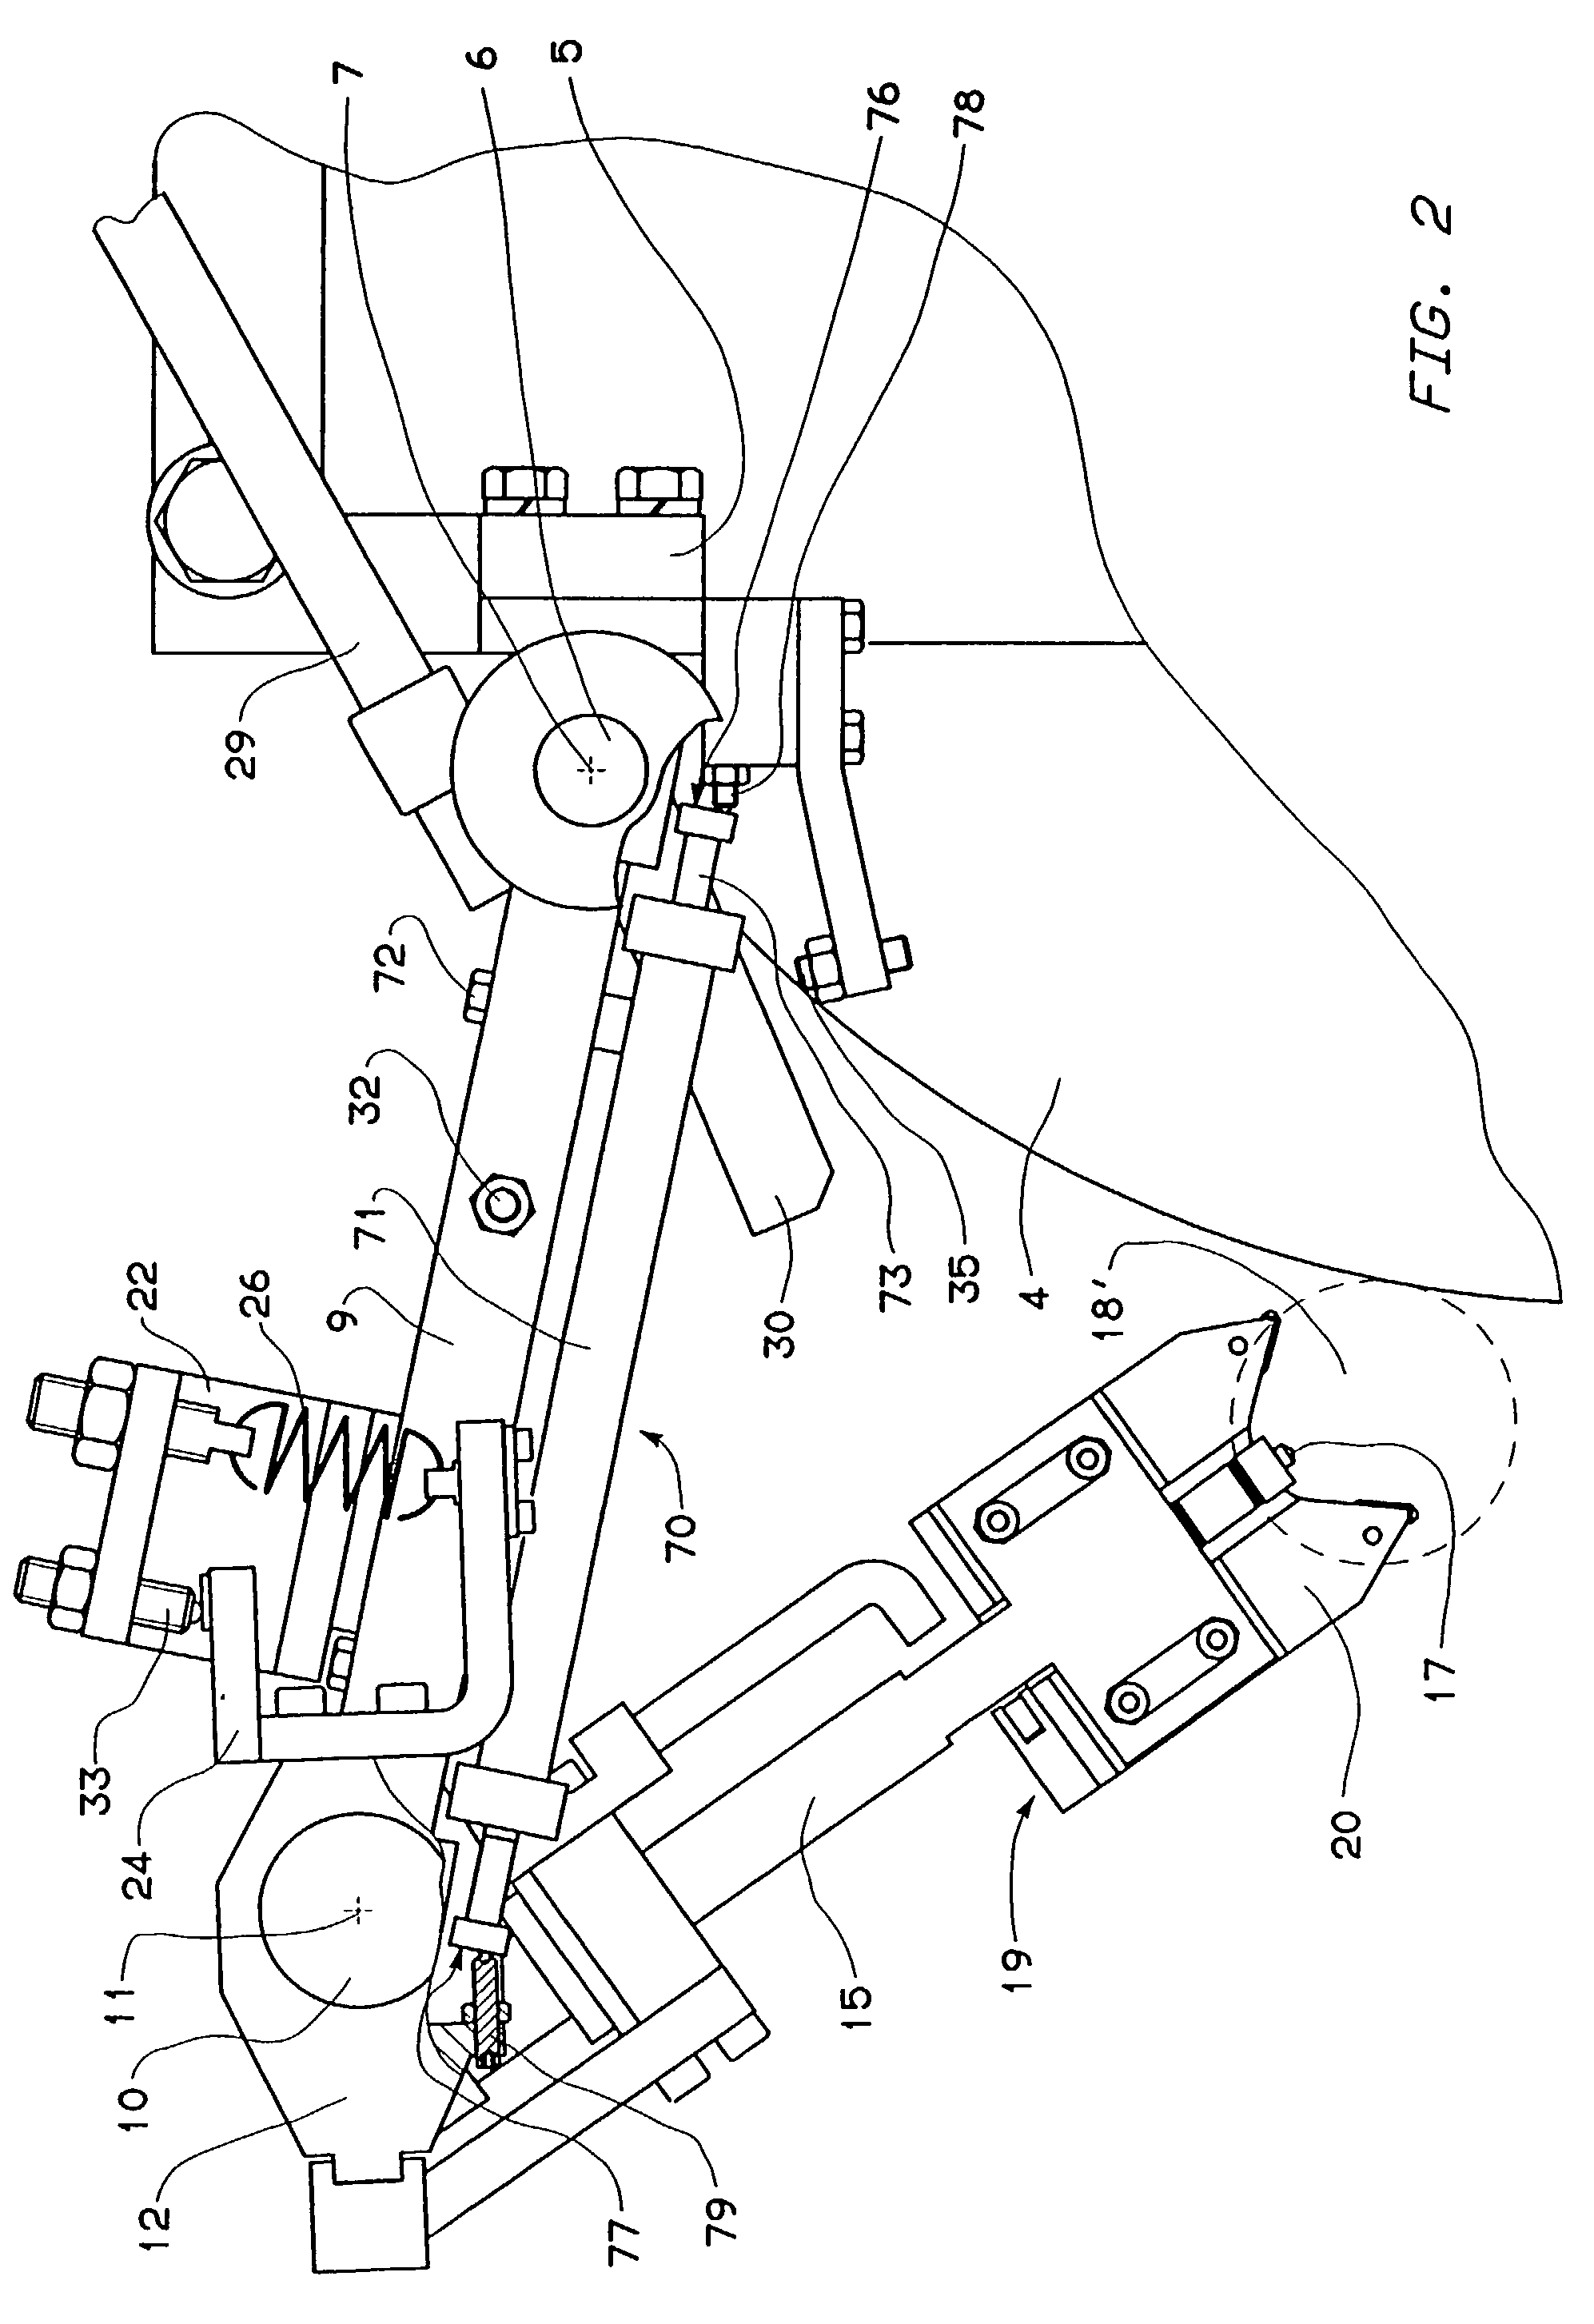 Apparatus for the in-process dimensional checking of cylindrical parts